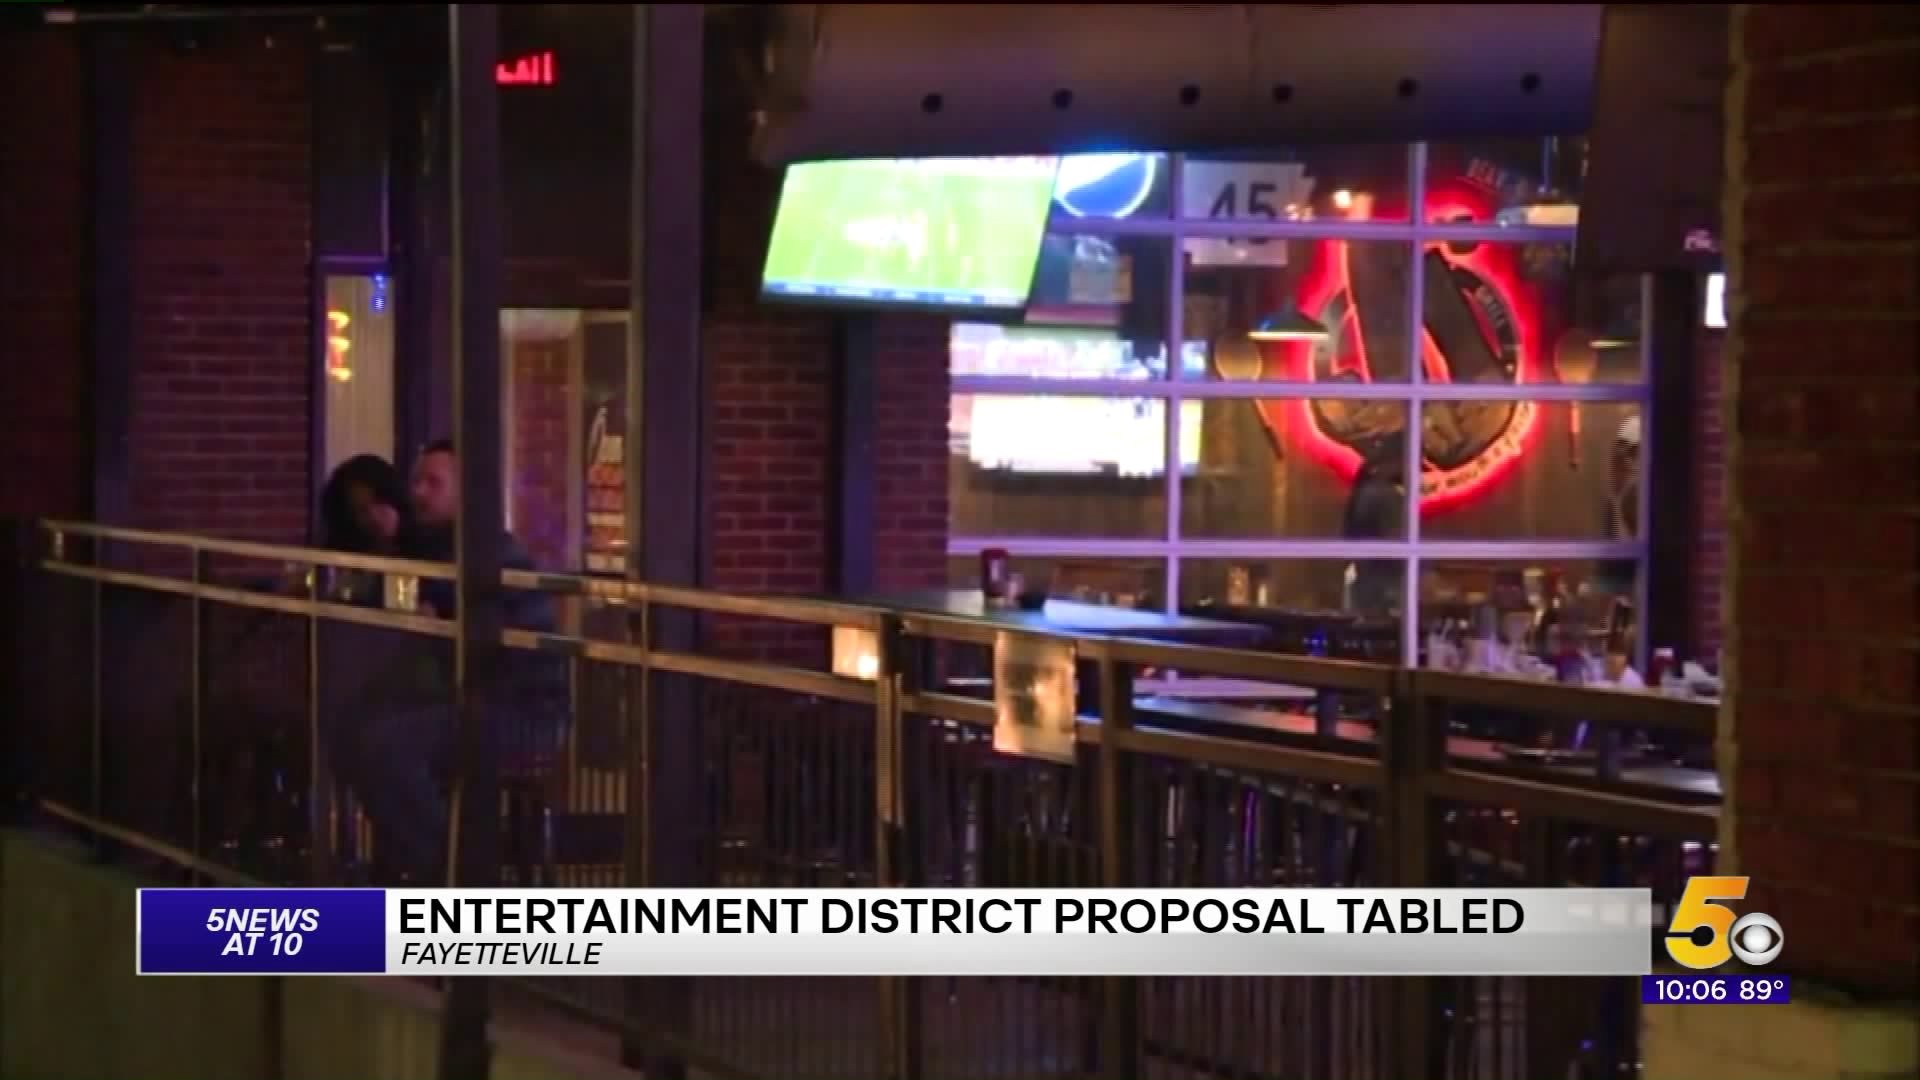 Fayetteville Entertainment Proposal Tabled